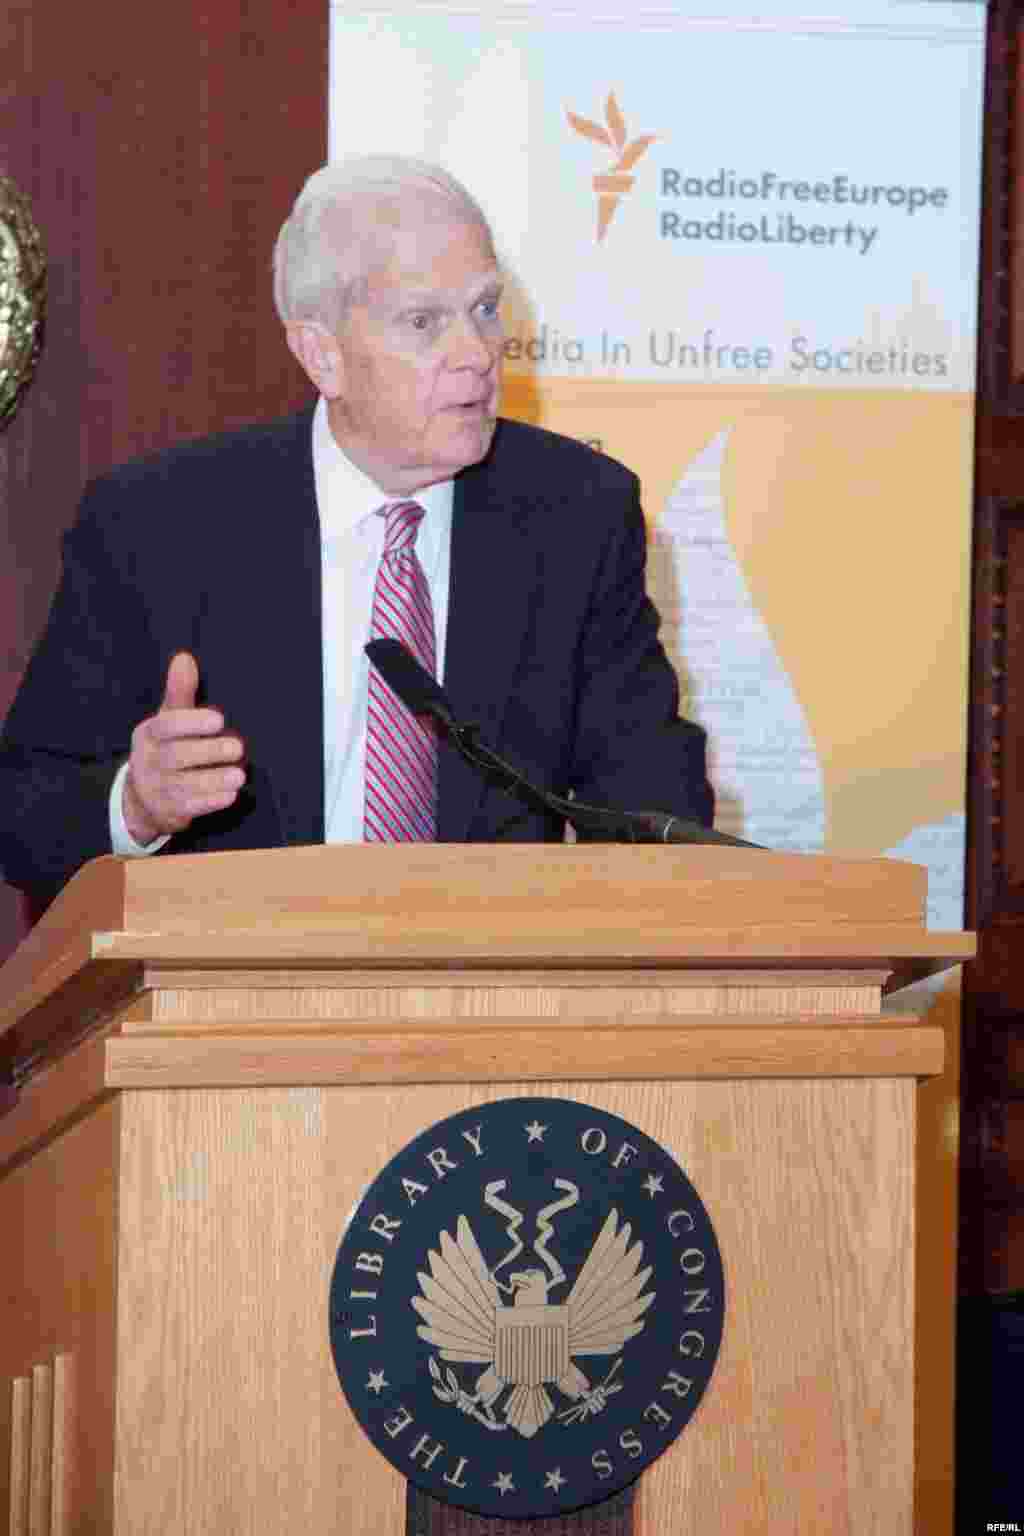 Librarian of Congress Dr. James Billington speaking at the opening of the exhibit. - (Photo by P. Alunans)